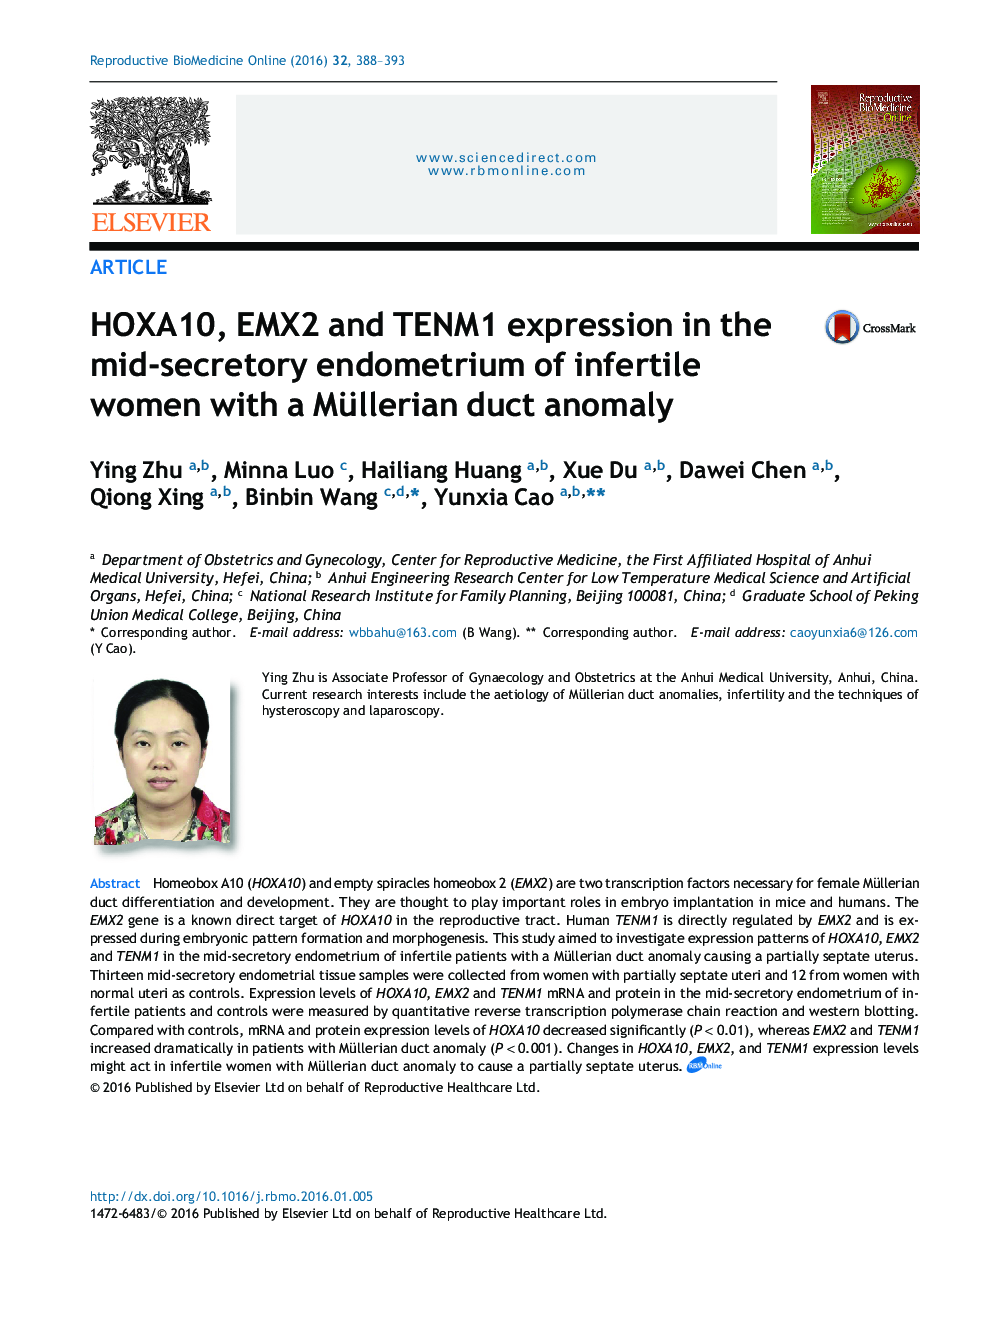 HOXA10, EMX2 and TENM1 expression in the mid-secretory endometrium of infertile women with a Müllerian duct anomaly